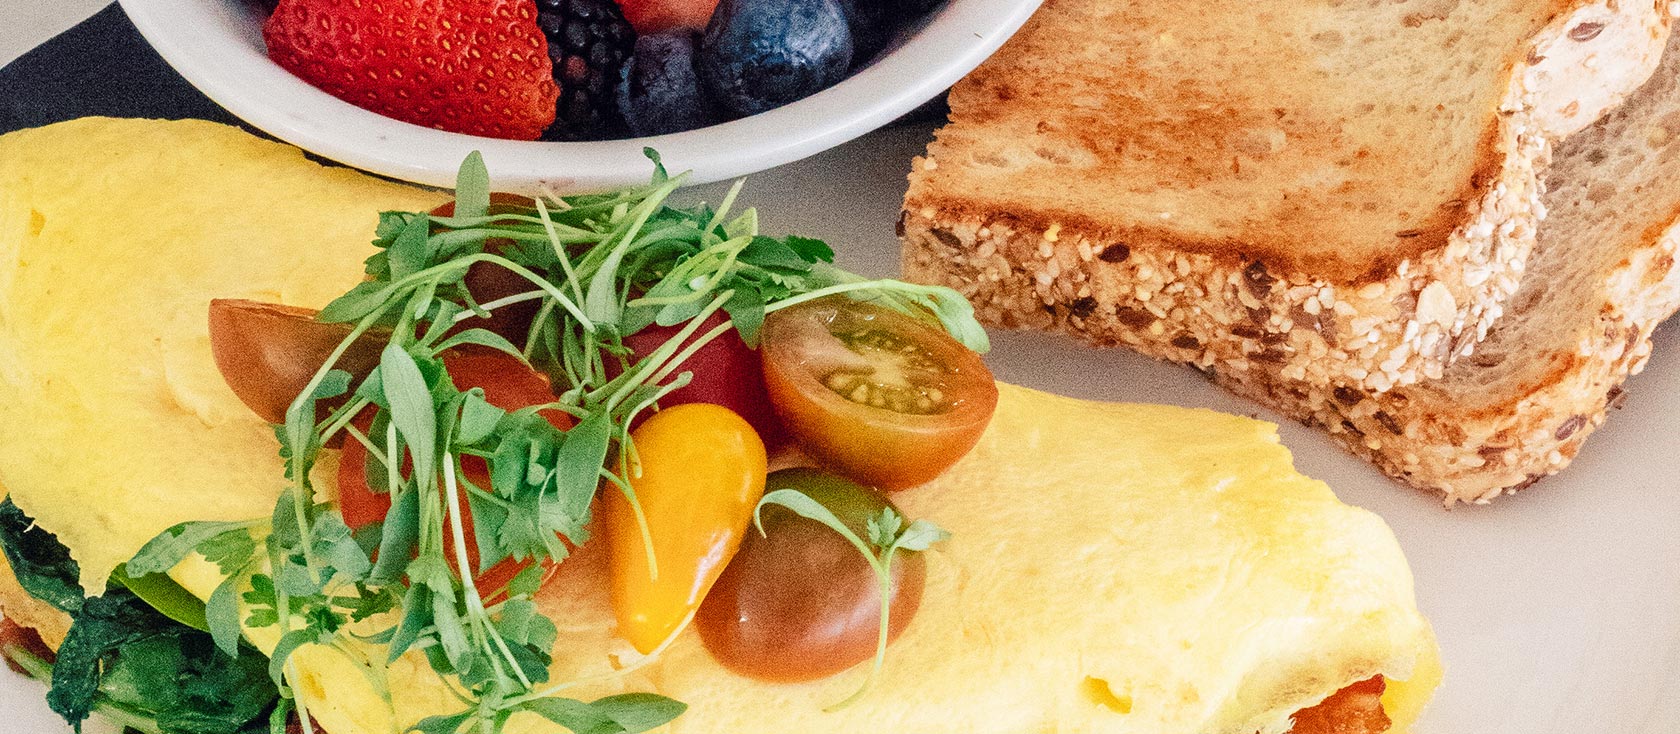 Omelet garnished with tomatoes with bowl of berries and toast